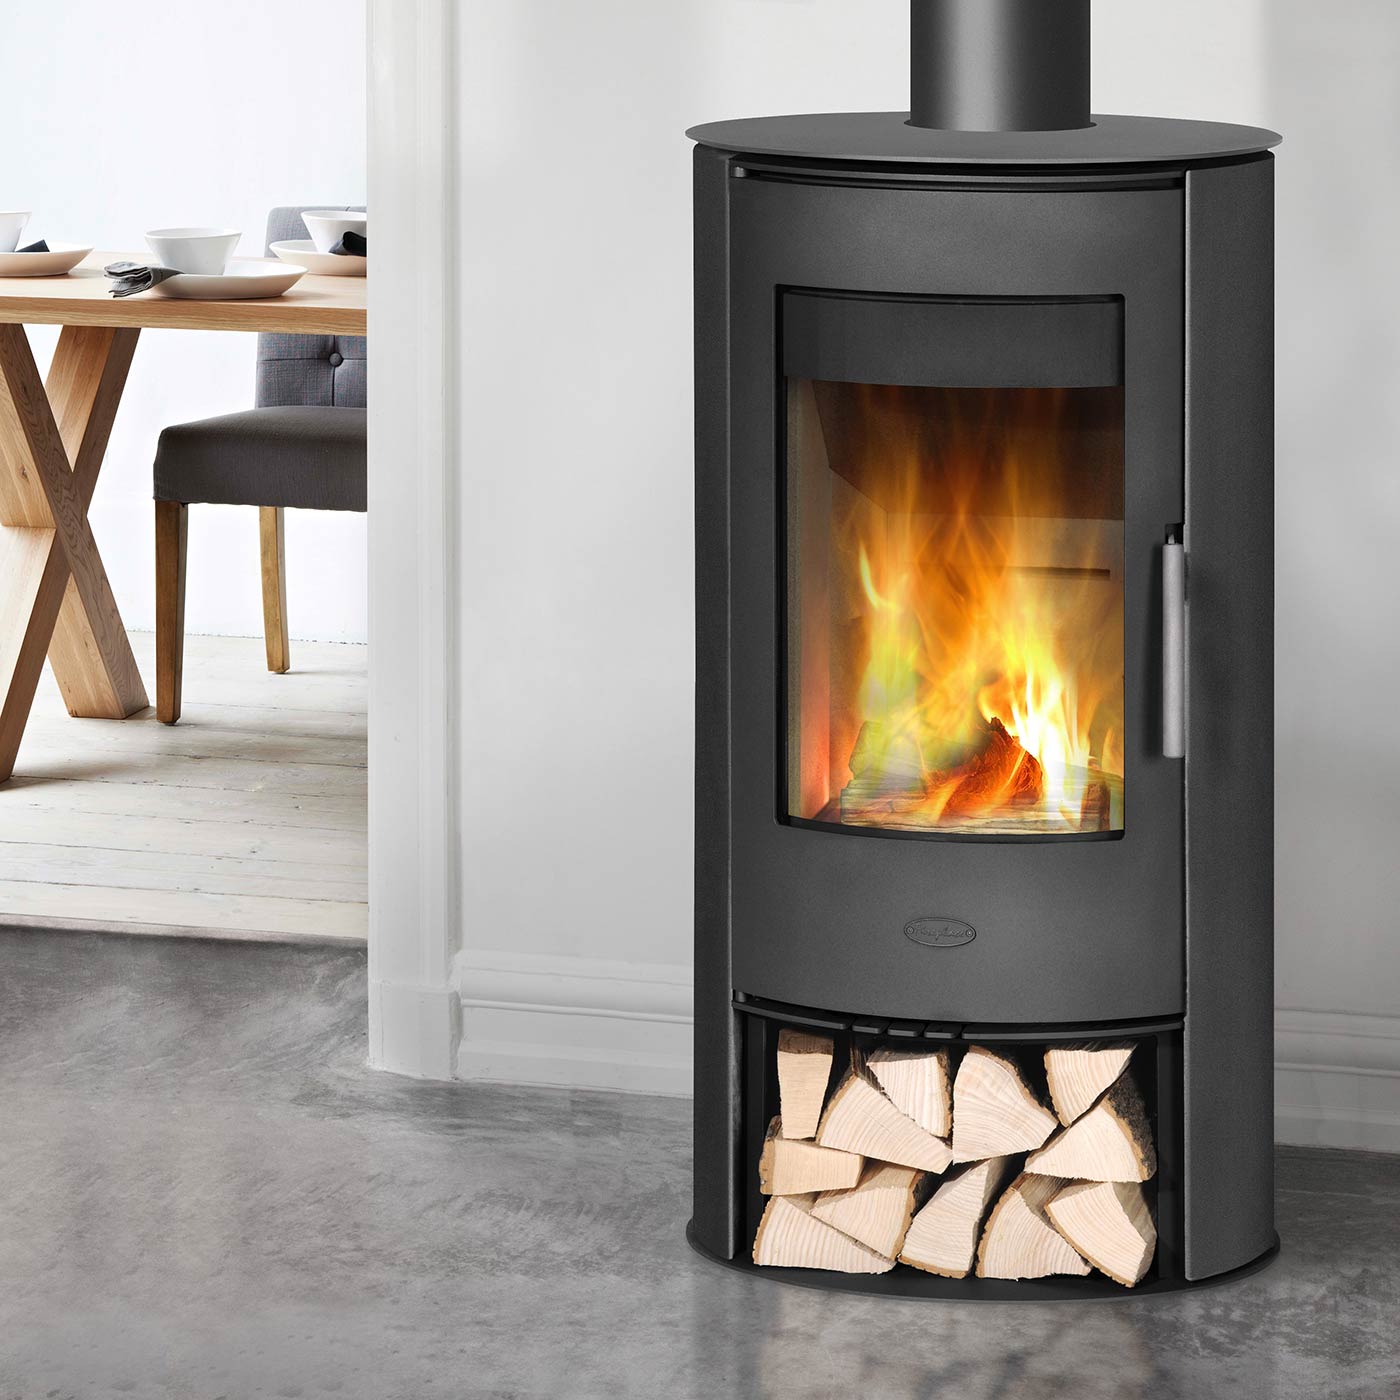 New to Bowland Stoves